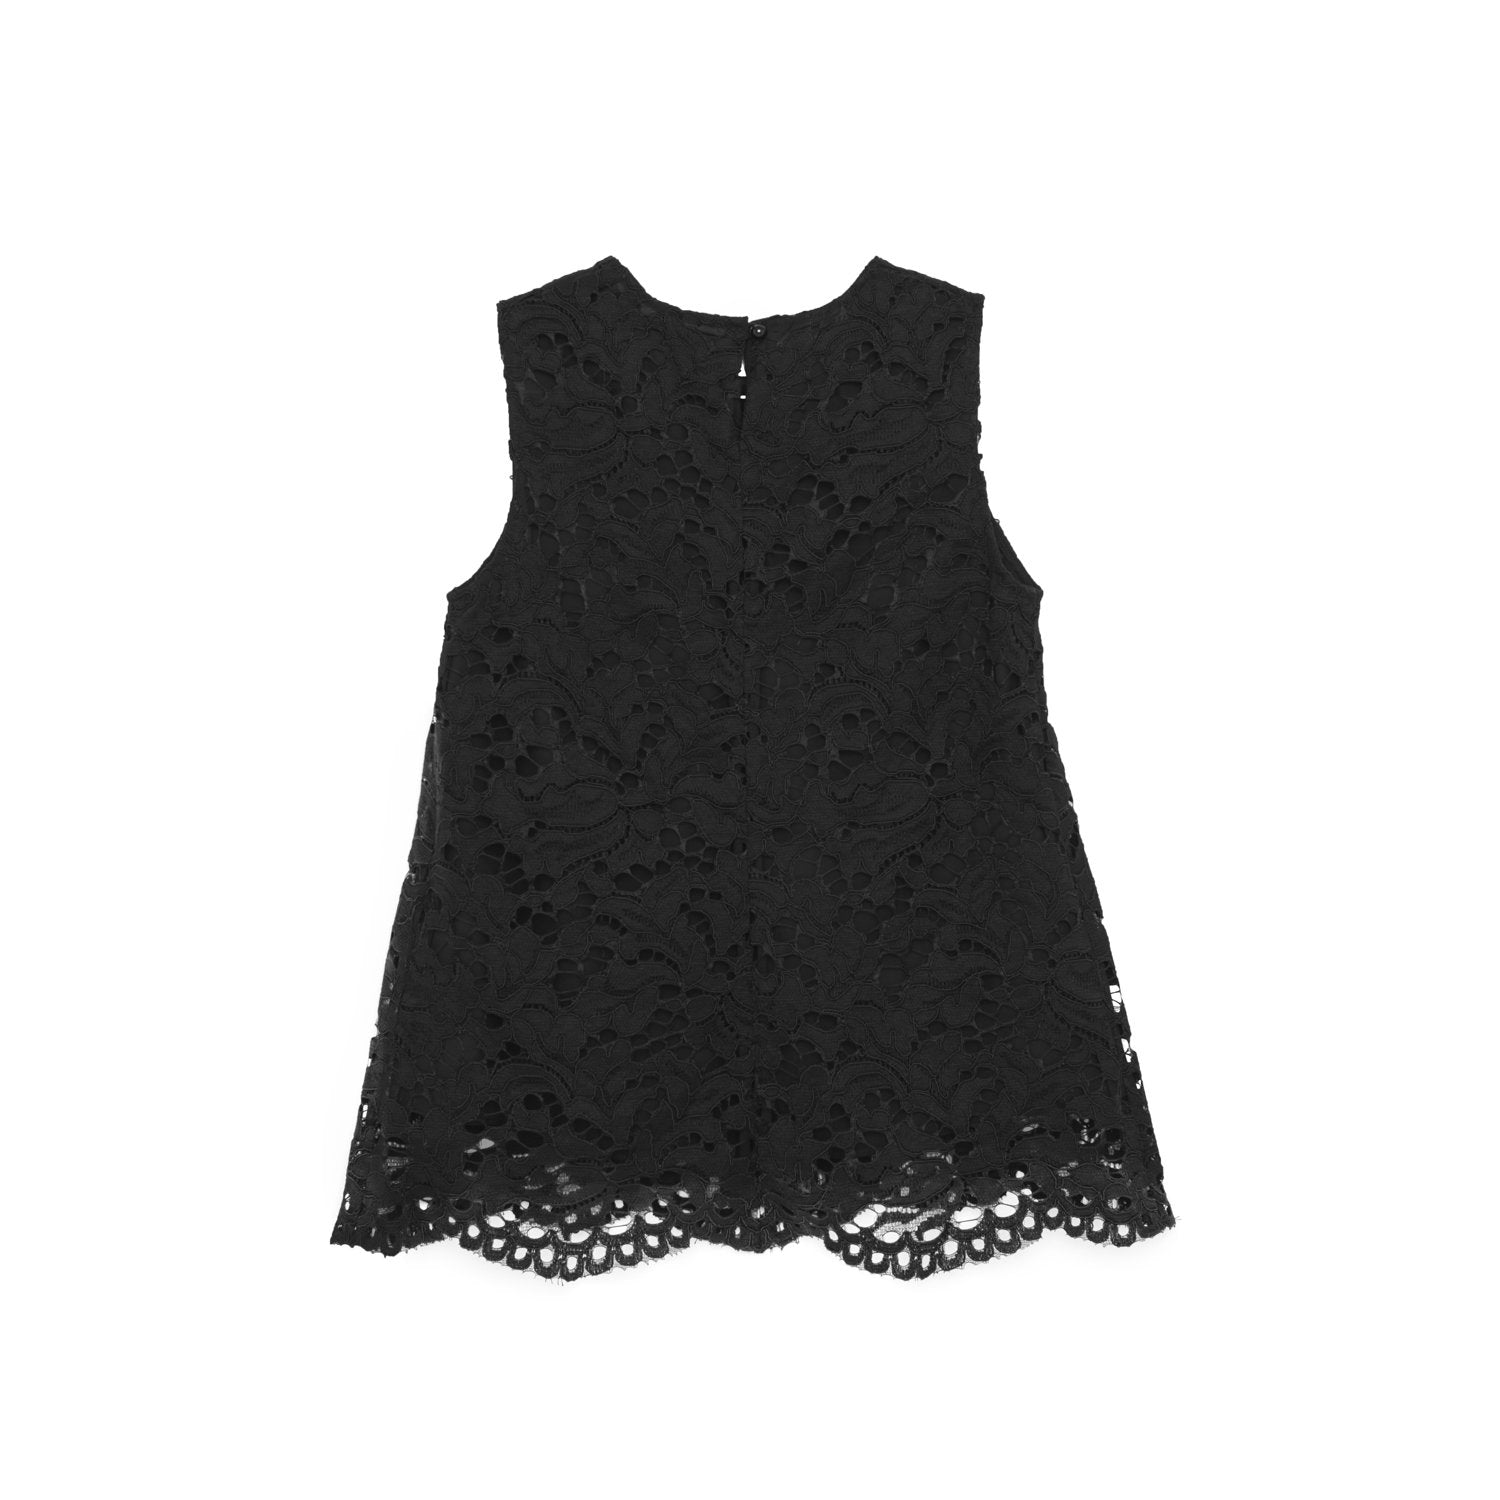 Lace Top in Black.